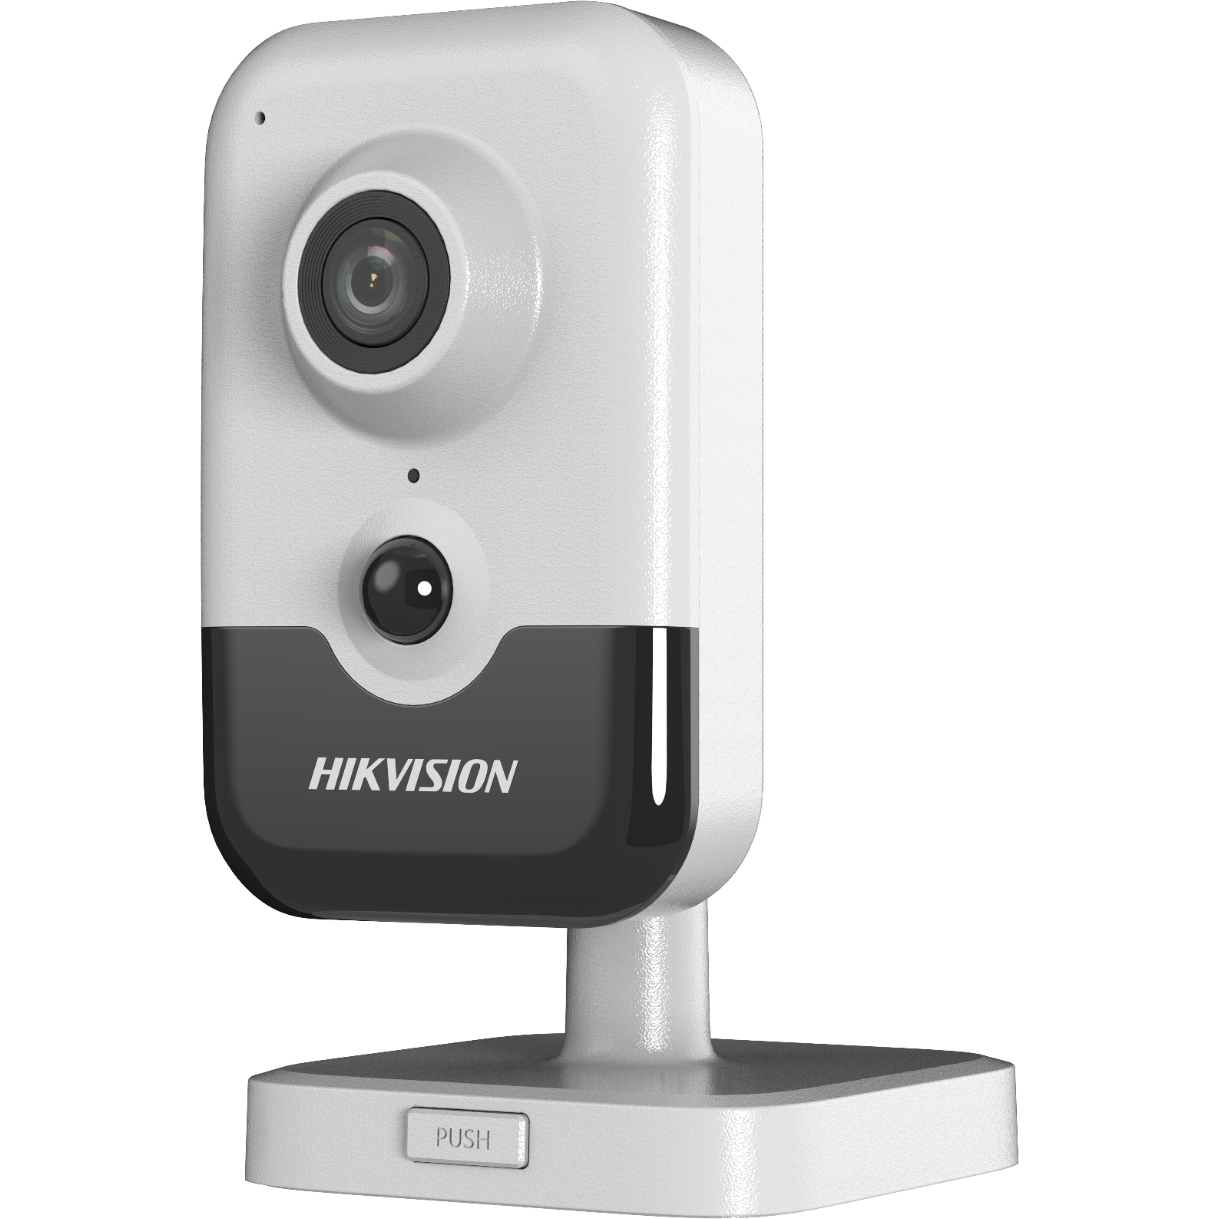 IP- Hikvision DS-2CD2423G0-IW